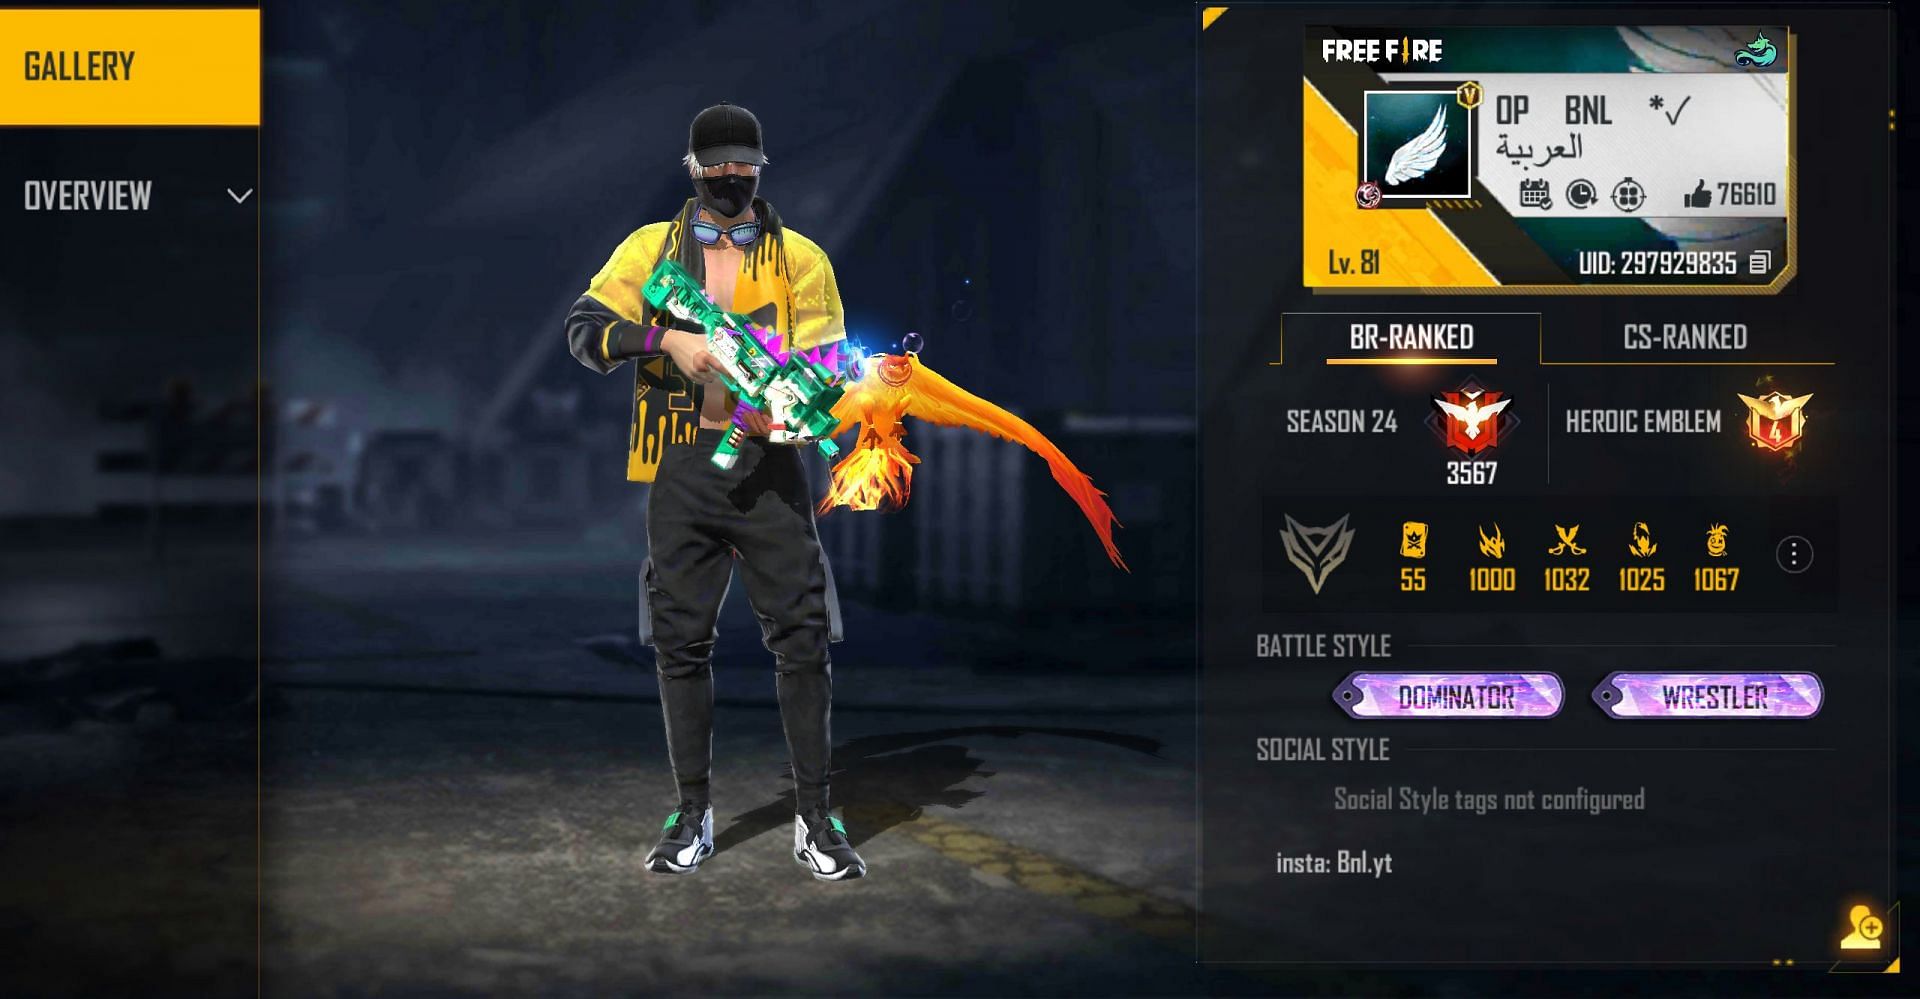 BNL has not played duo games yet (Image via Free Fire)